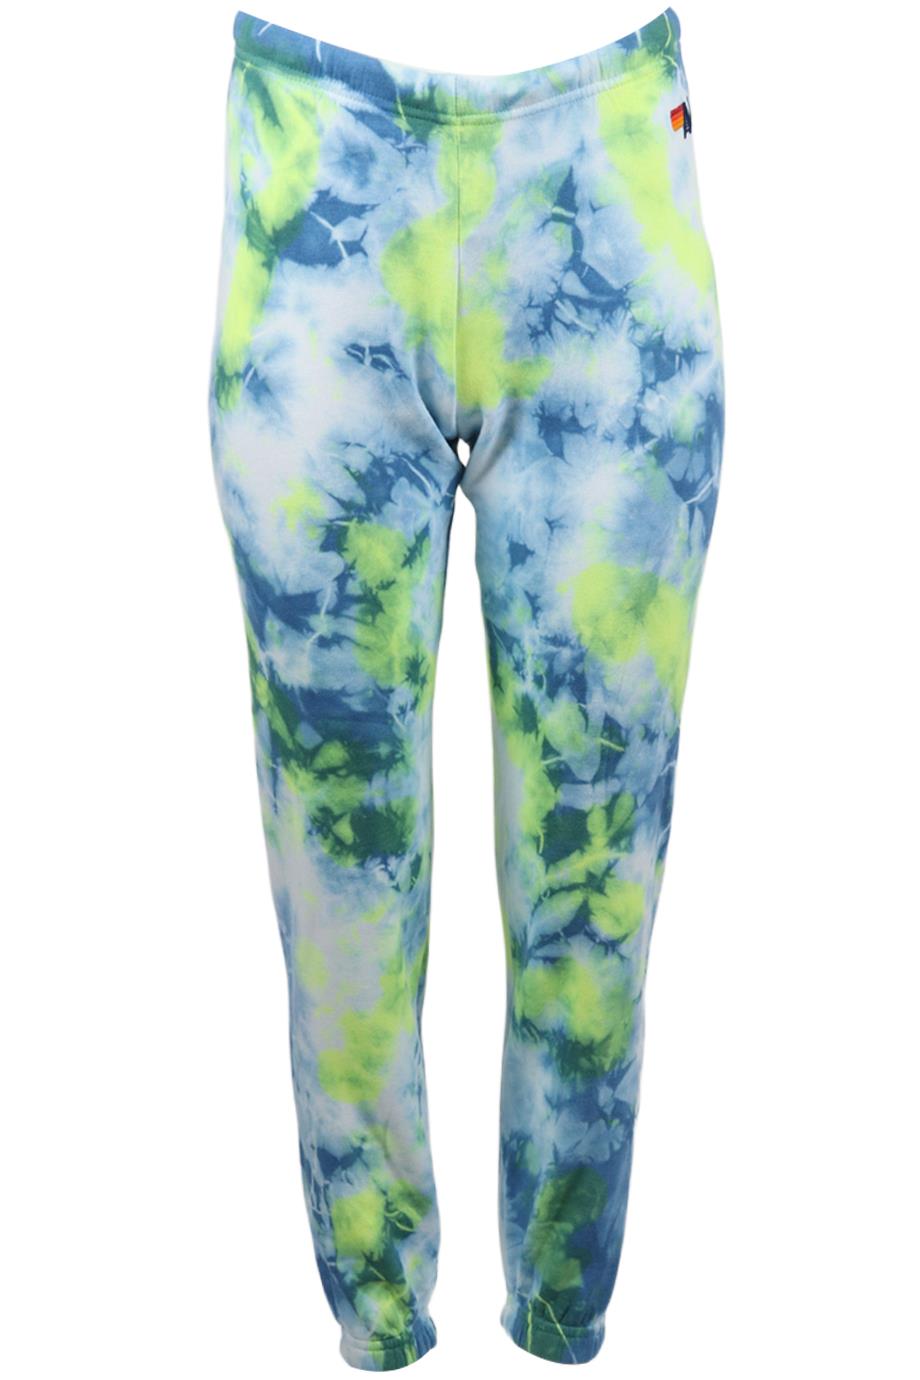 AVIATOR NATION TIE DYED COTTON BLEND TRACK PANTS XSMALL